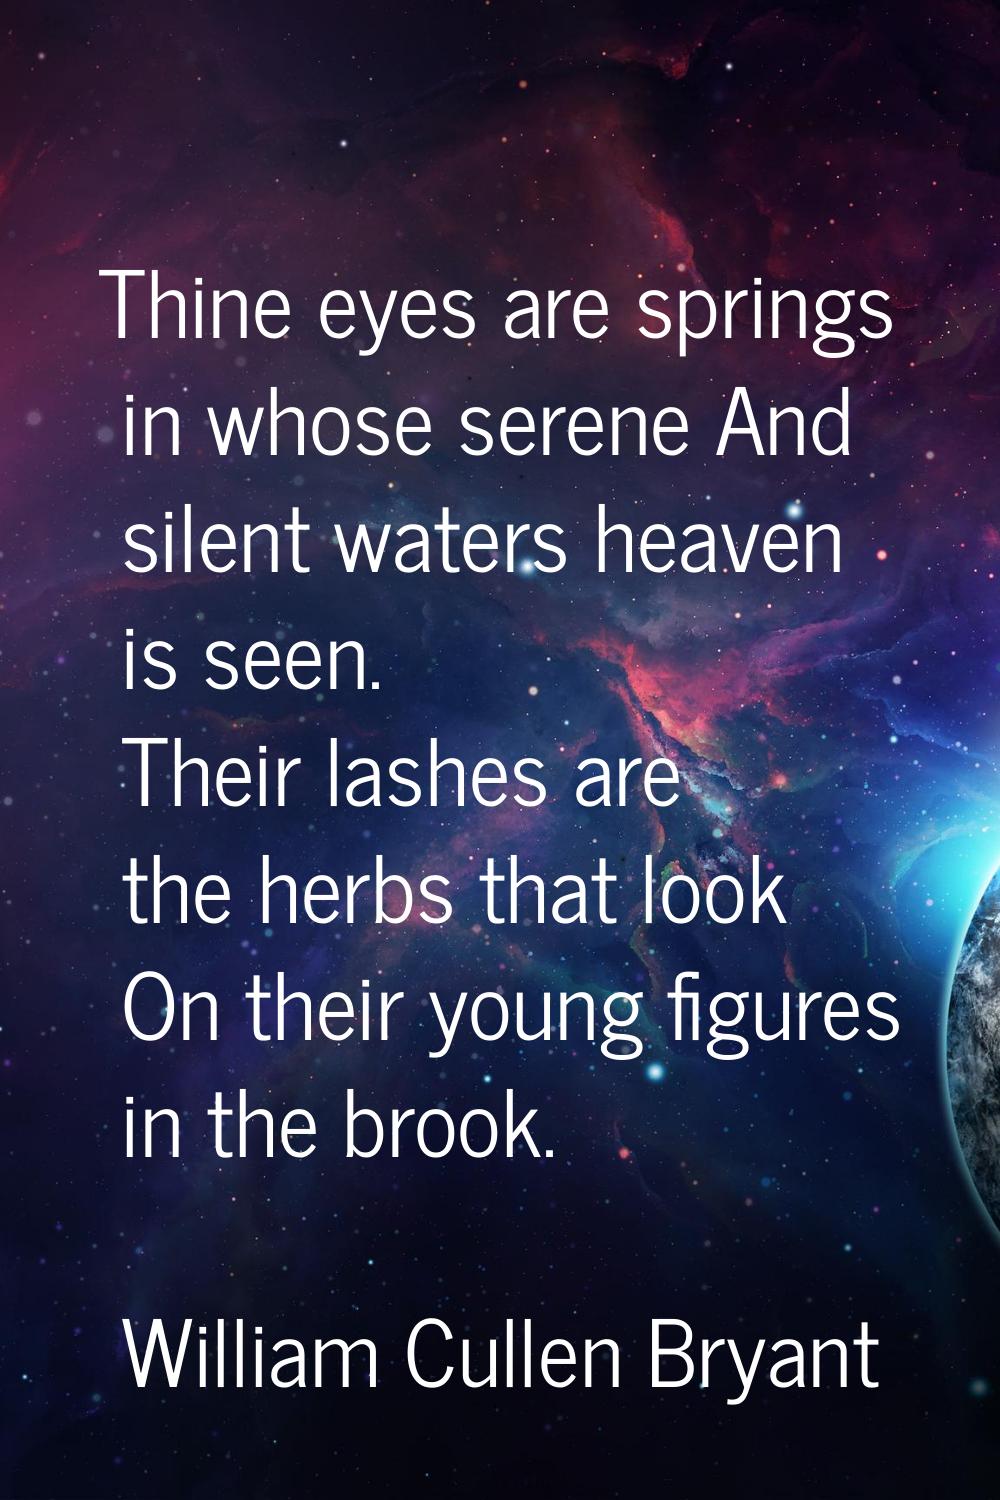 Thine eyes are springs in whose serene And silent waters heaven is seen. Their lashes are the herbs